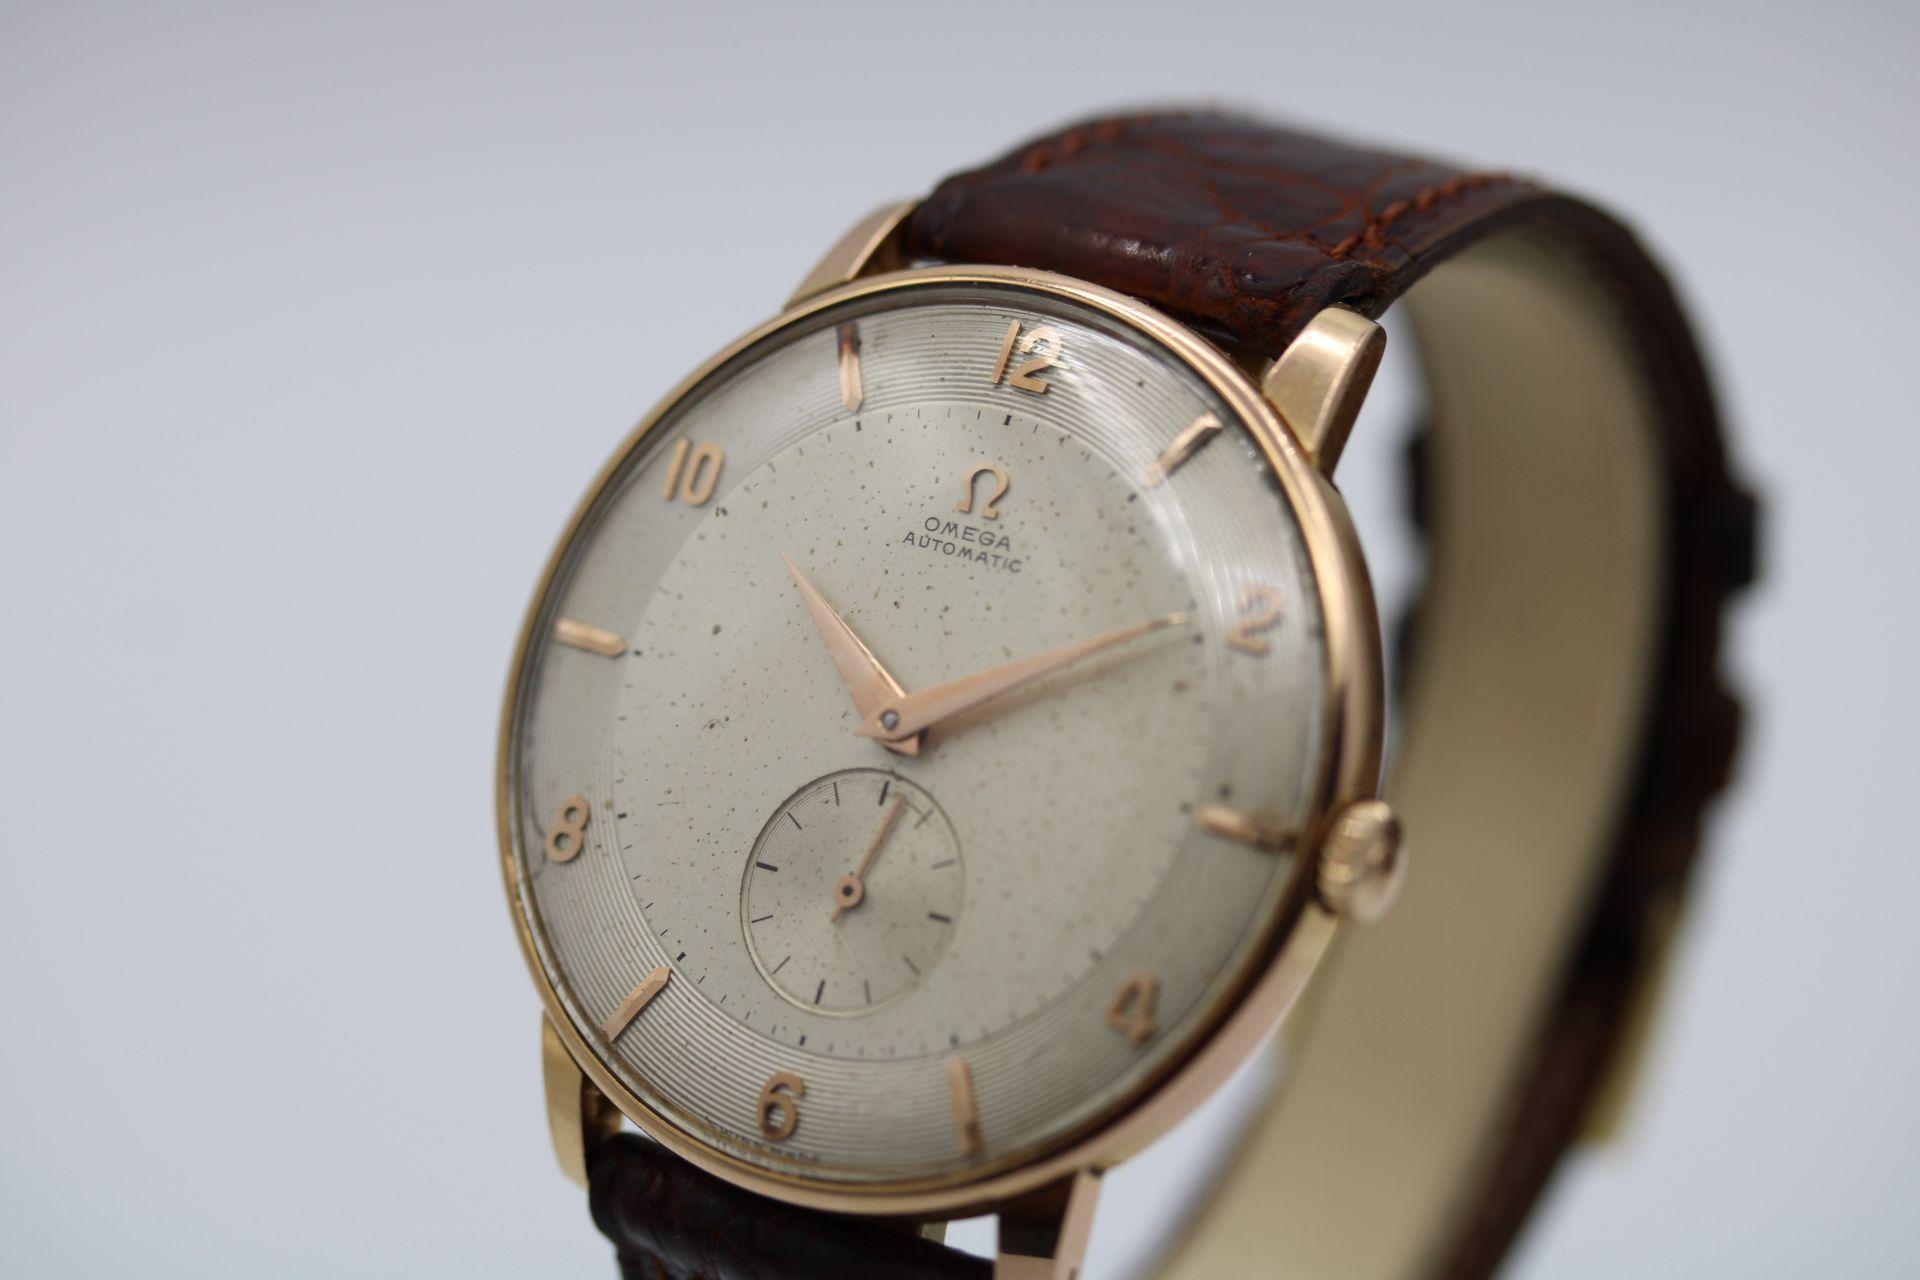 Now this really is quite an unusual pieces, from the 1950's believe it or not this beautiful looking Omega Dress Watch has a 38mm size case! Almost unheard of for the era with many that have survived generally measuring around 34mm.

38mm was